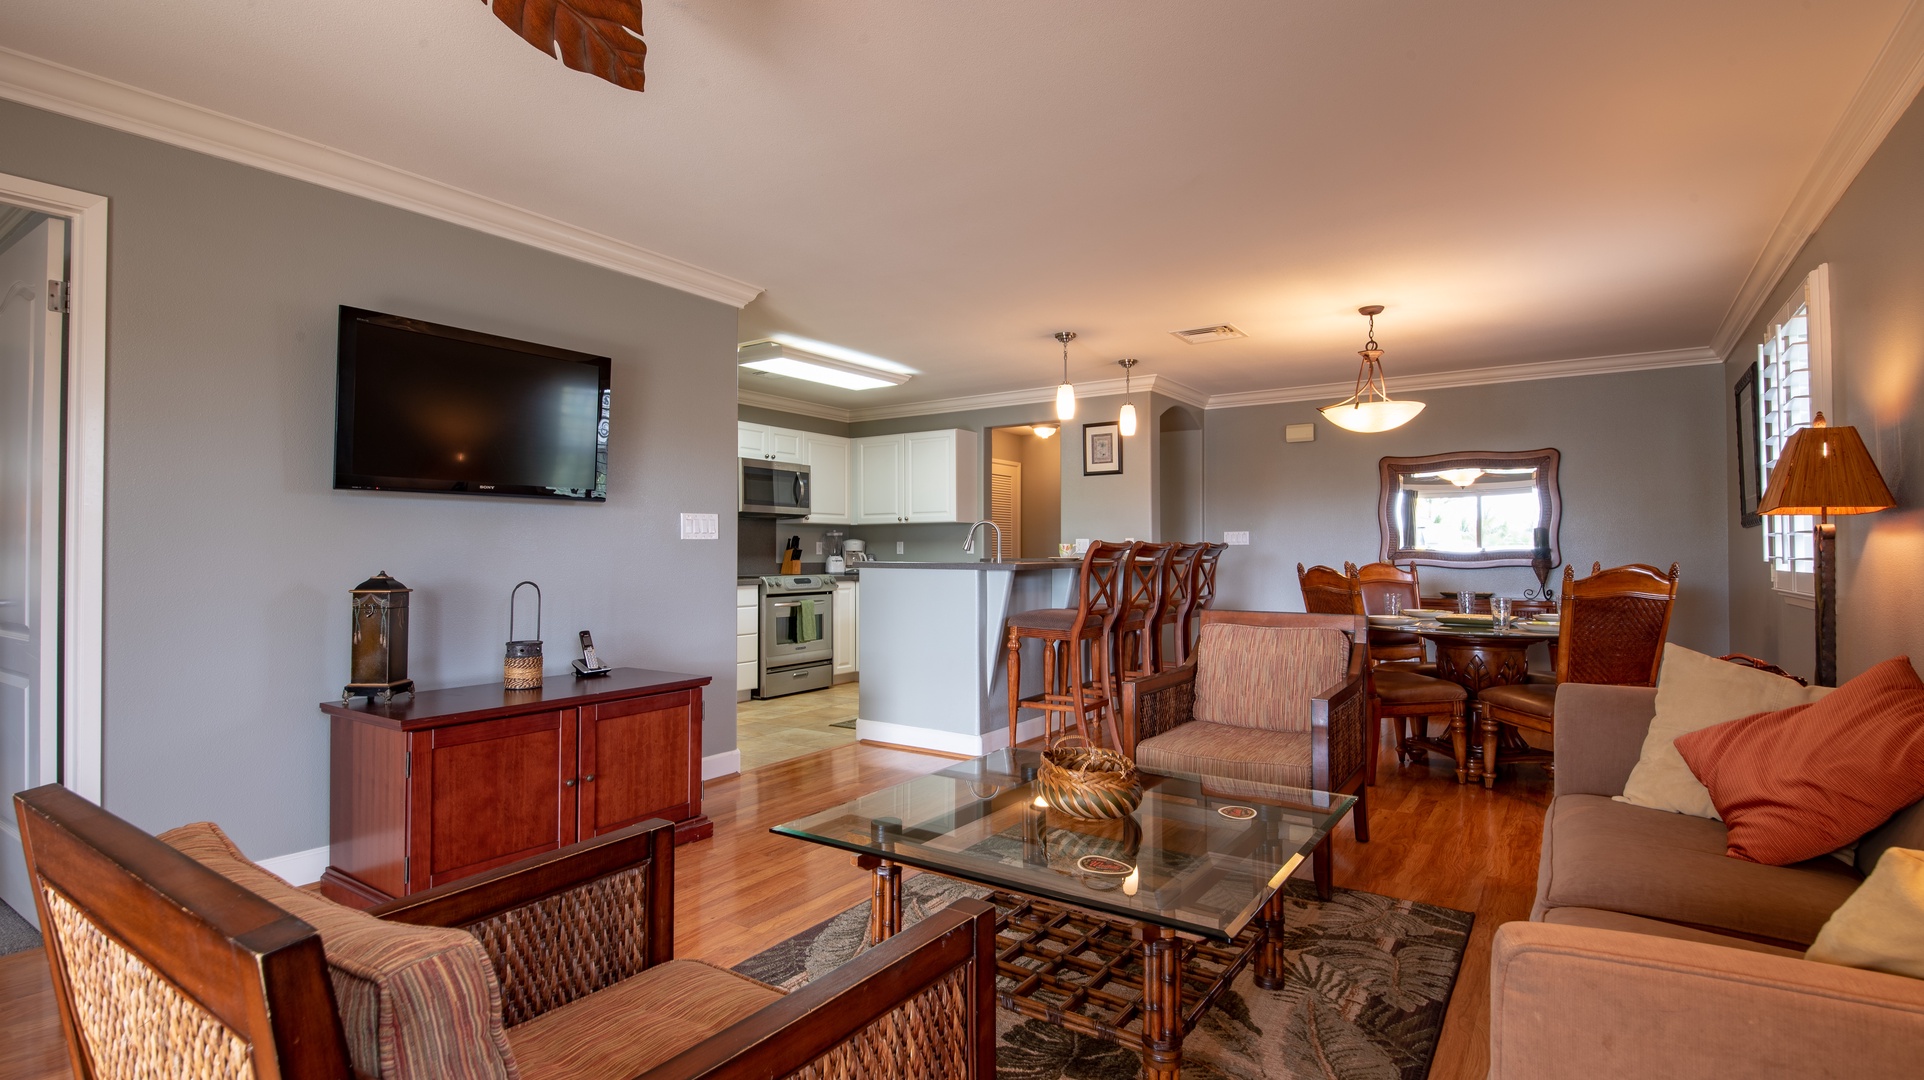 Kapolei Vacation Rentals, Ko Olina Kai 1047B - The open floor plan for the kitchen, living and dining room.